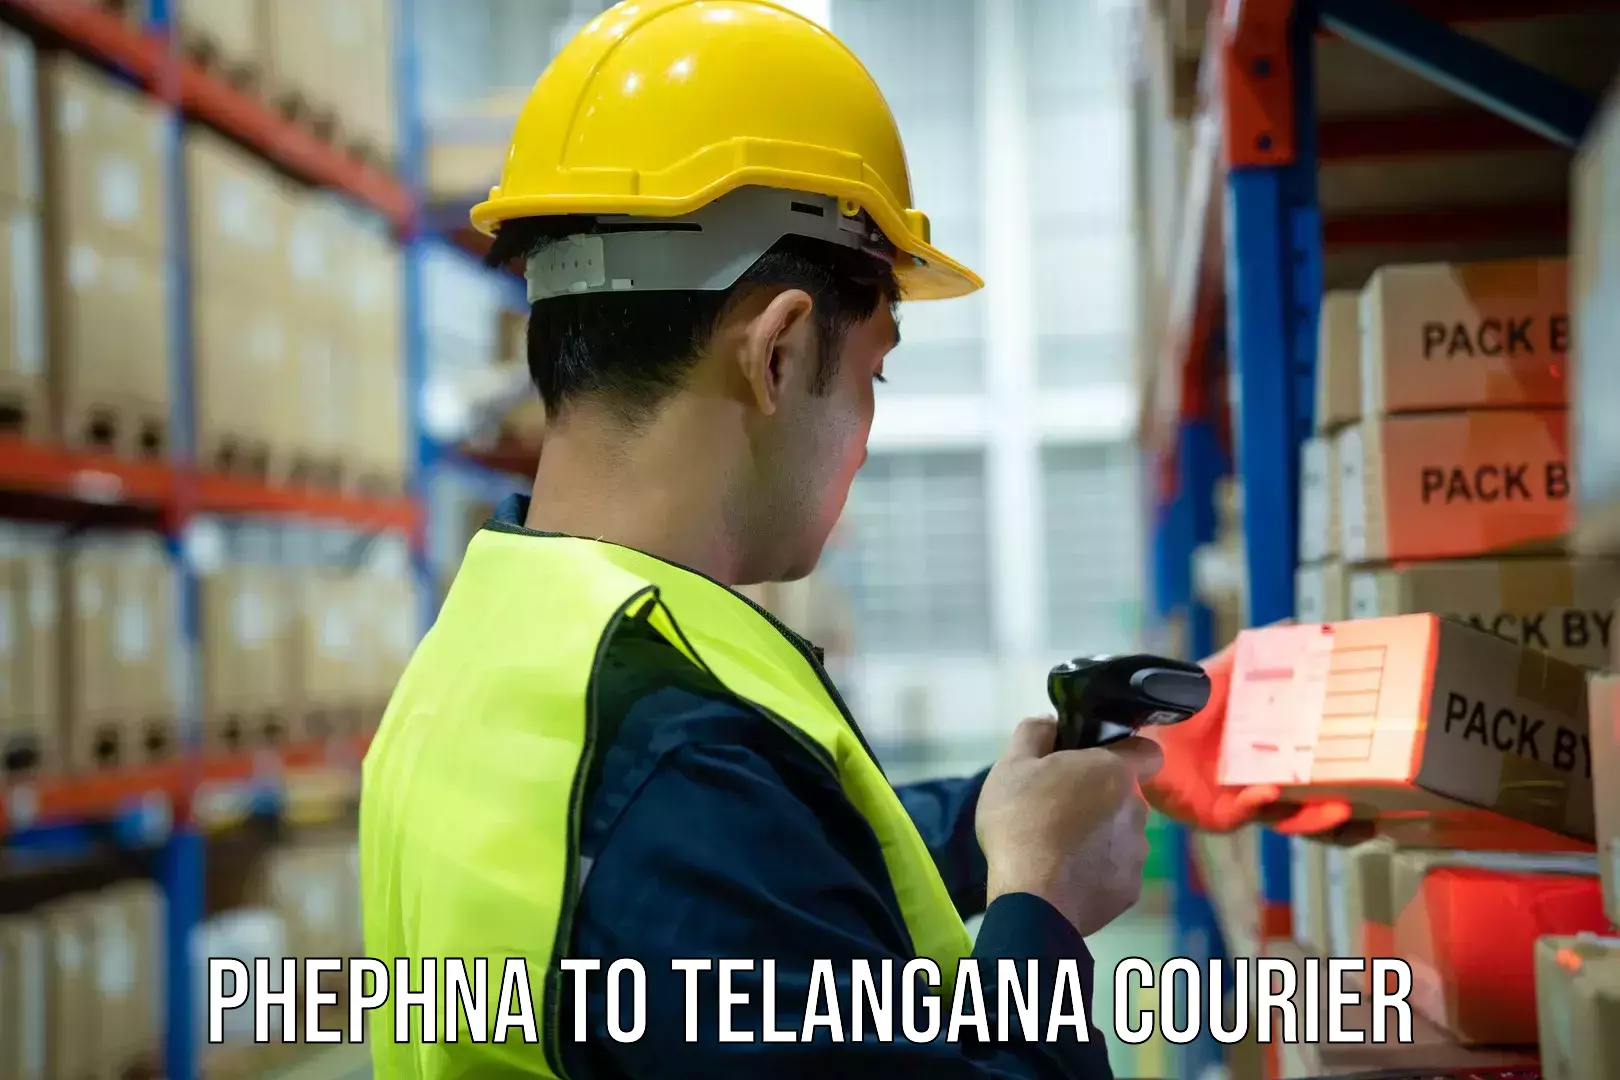 Secure package delivery in Phephna to Kothagudem